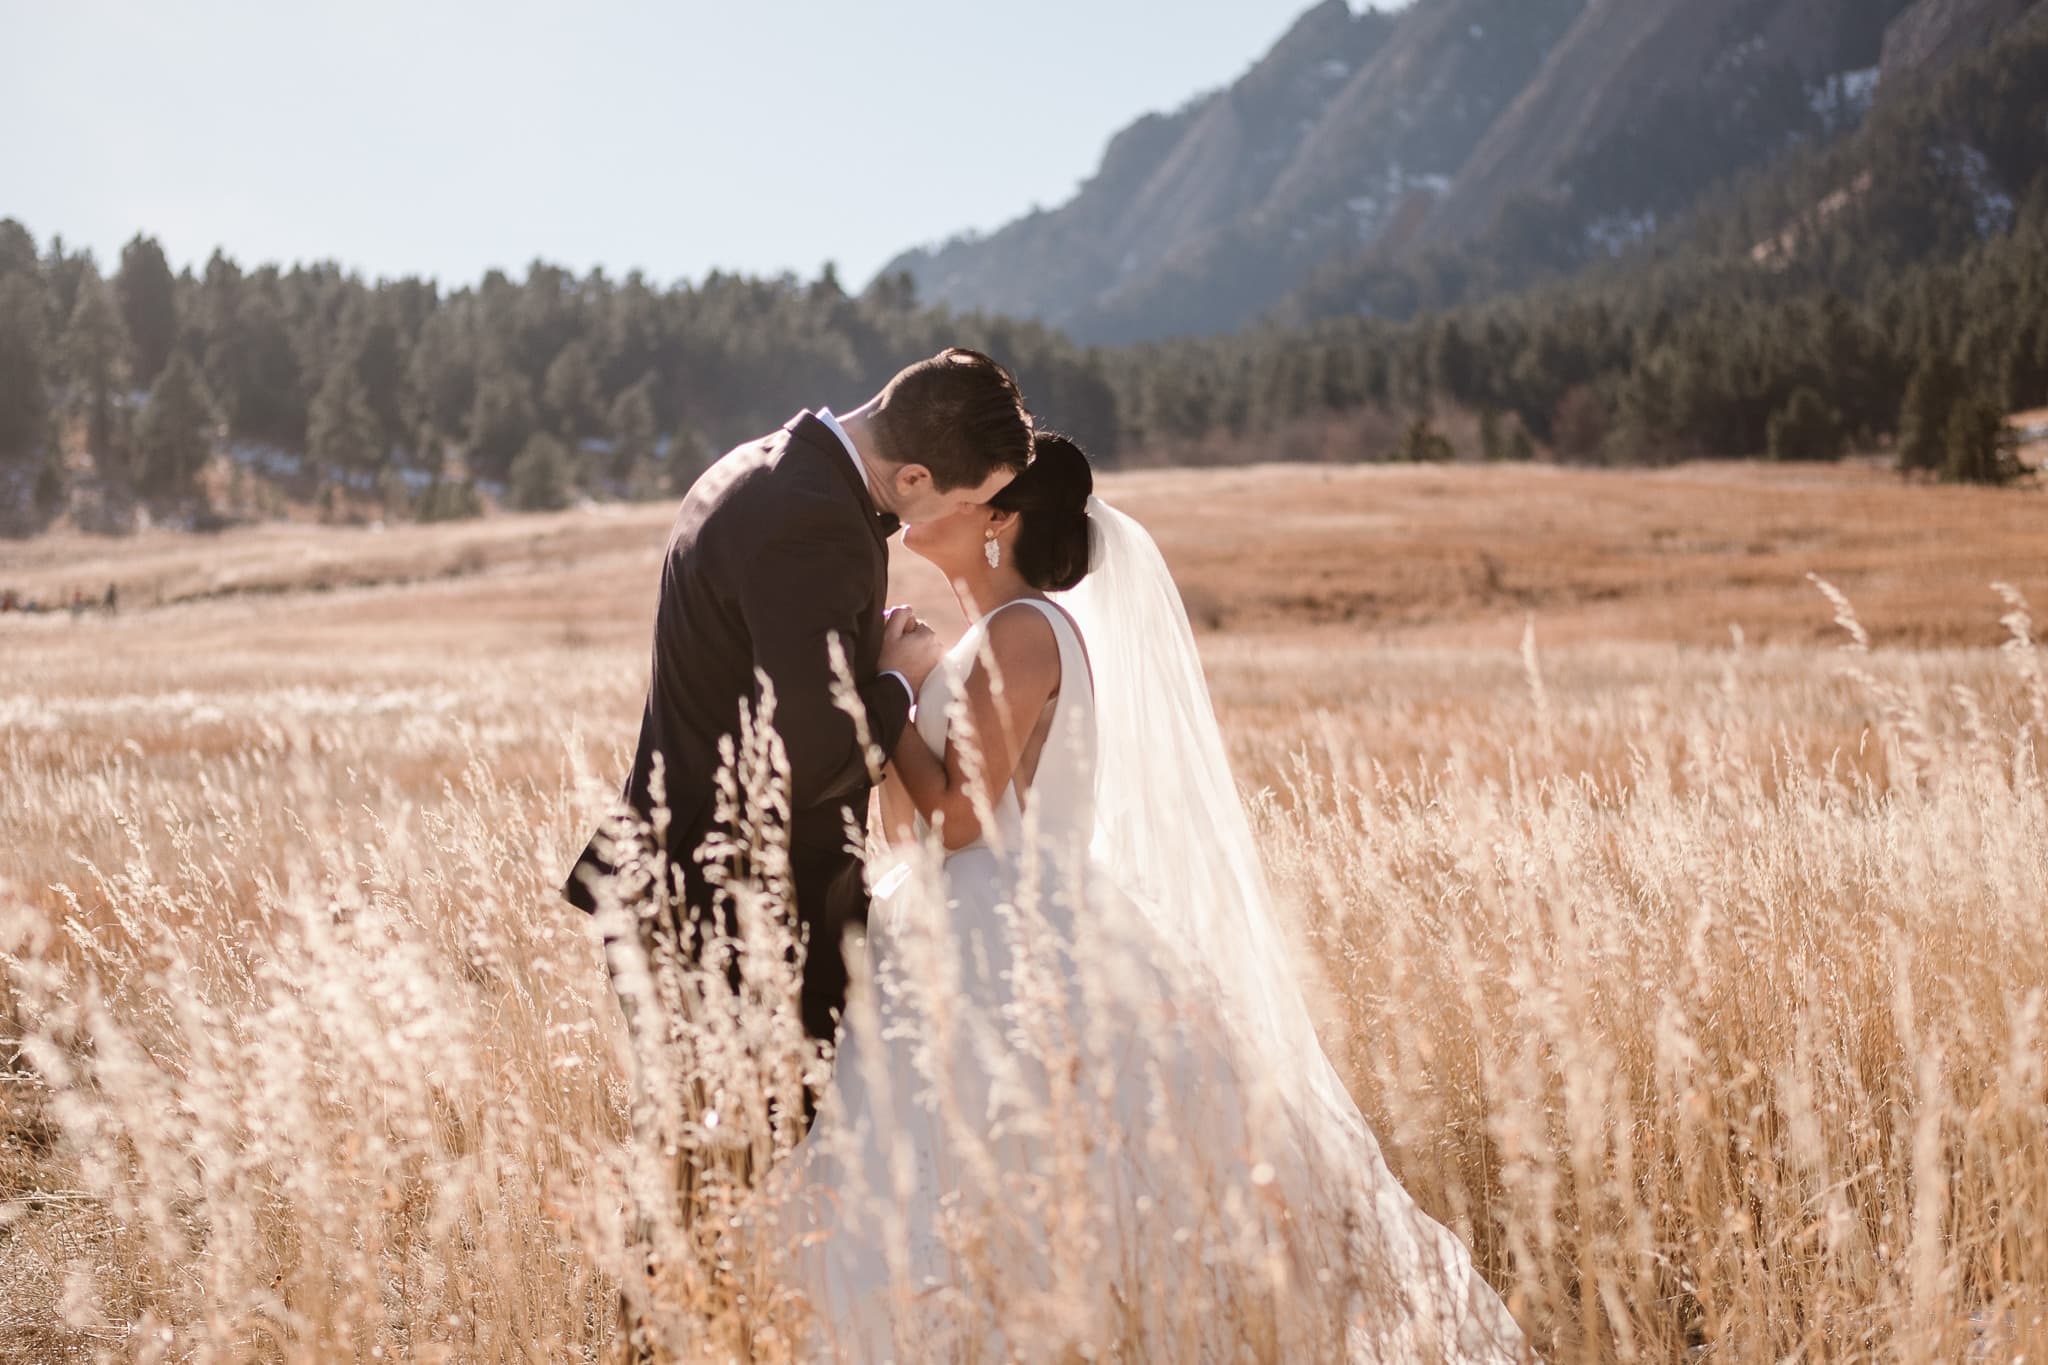 Bride and groom portraits at Chautauqua with views of the Flatirons, Boulder wedding photographer, Colorado wedding photographer, St Julien wedding with mountain wedding photos